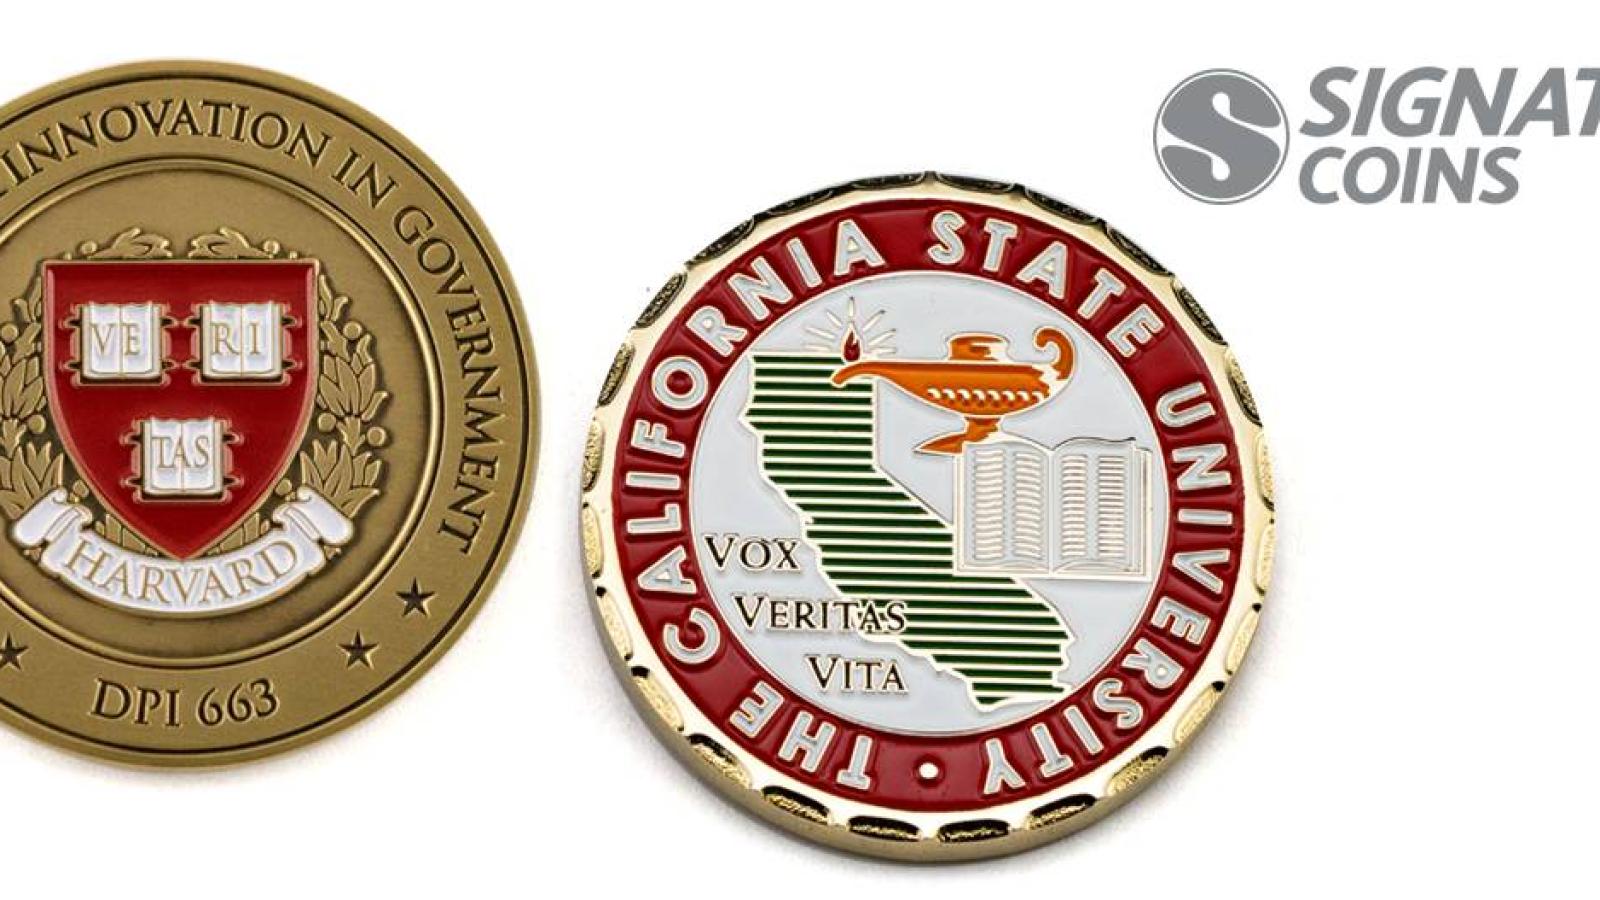 Two Examples of University Challenge Coins